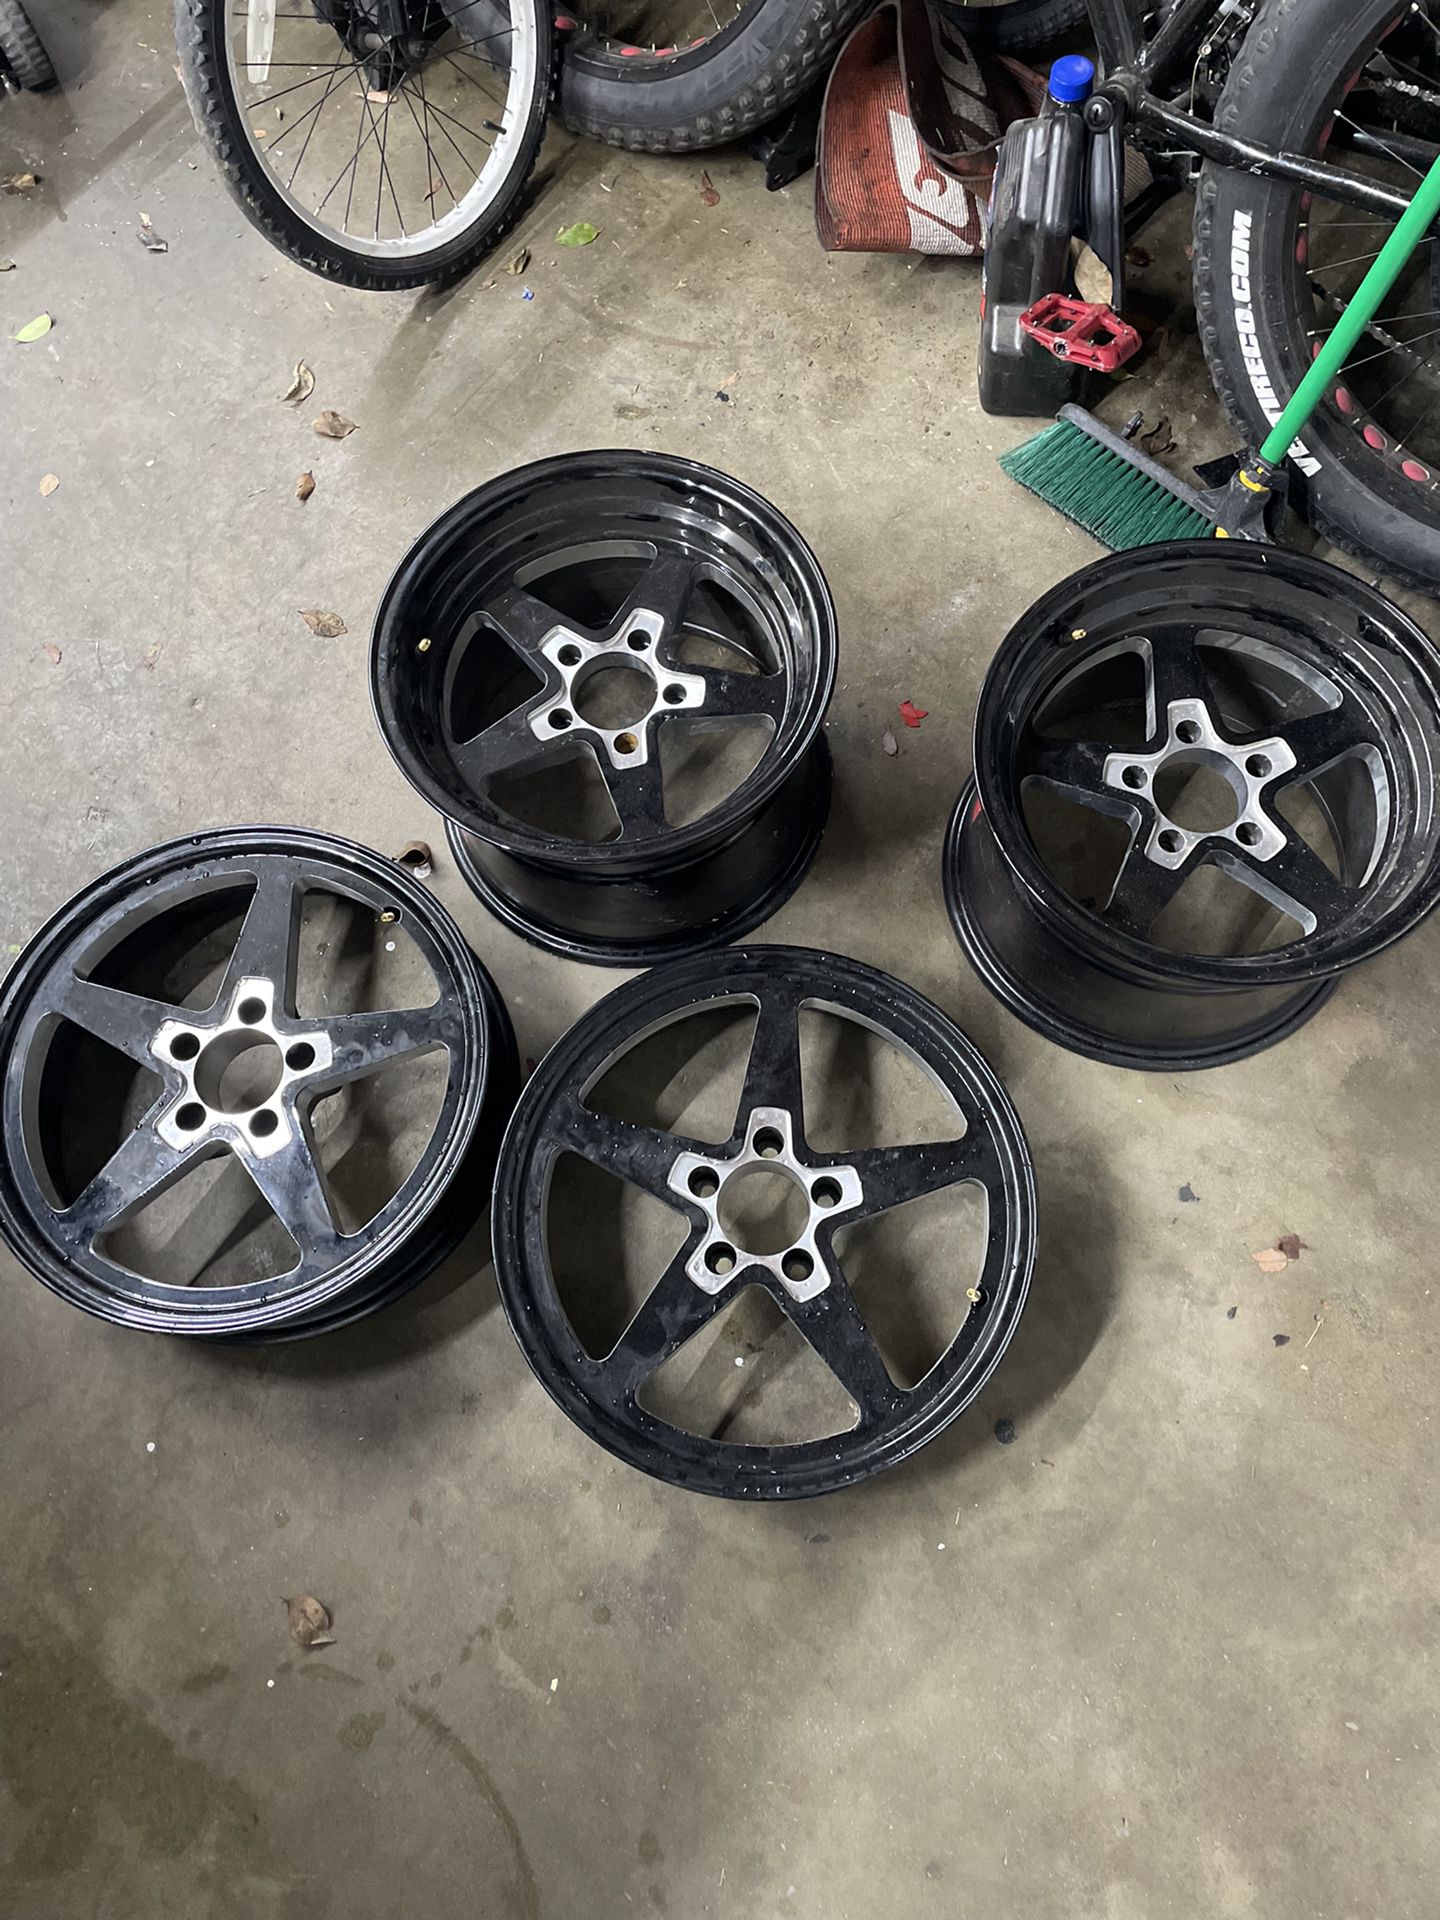 Mustang Jegs Ssr Star Wheels For Sale In Modesto Ca Offerup